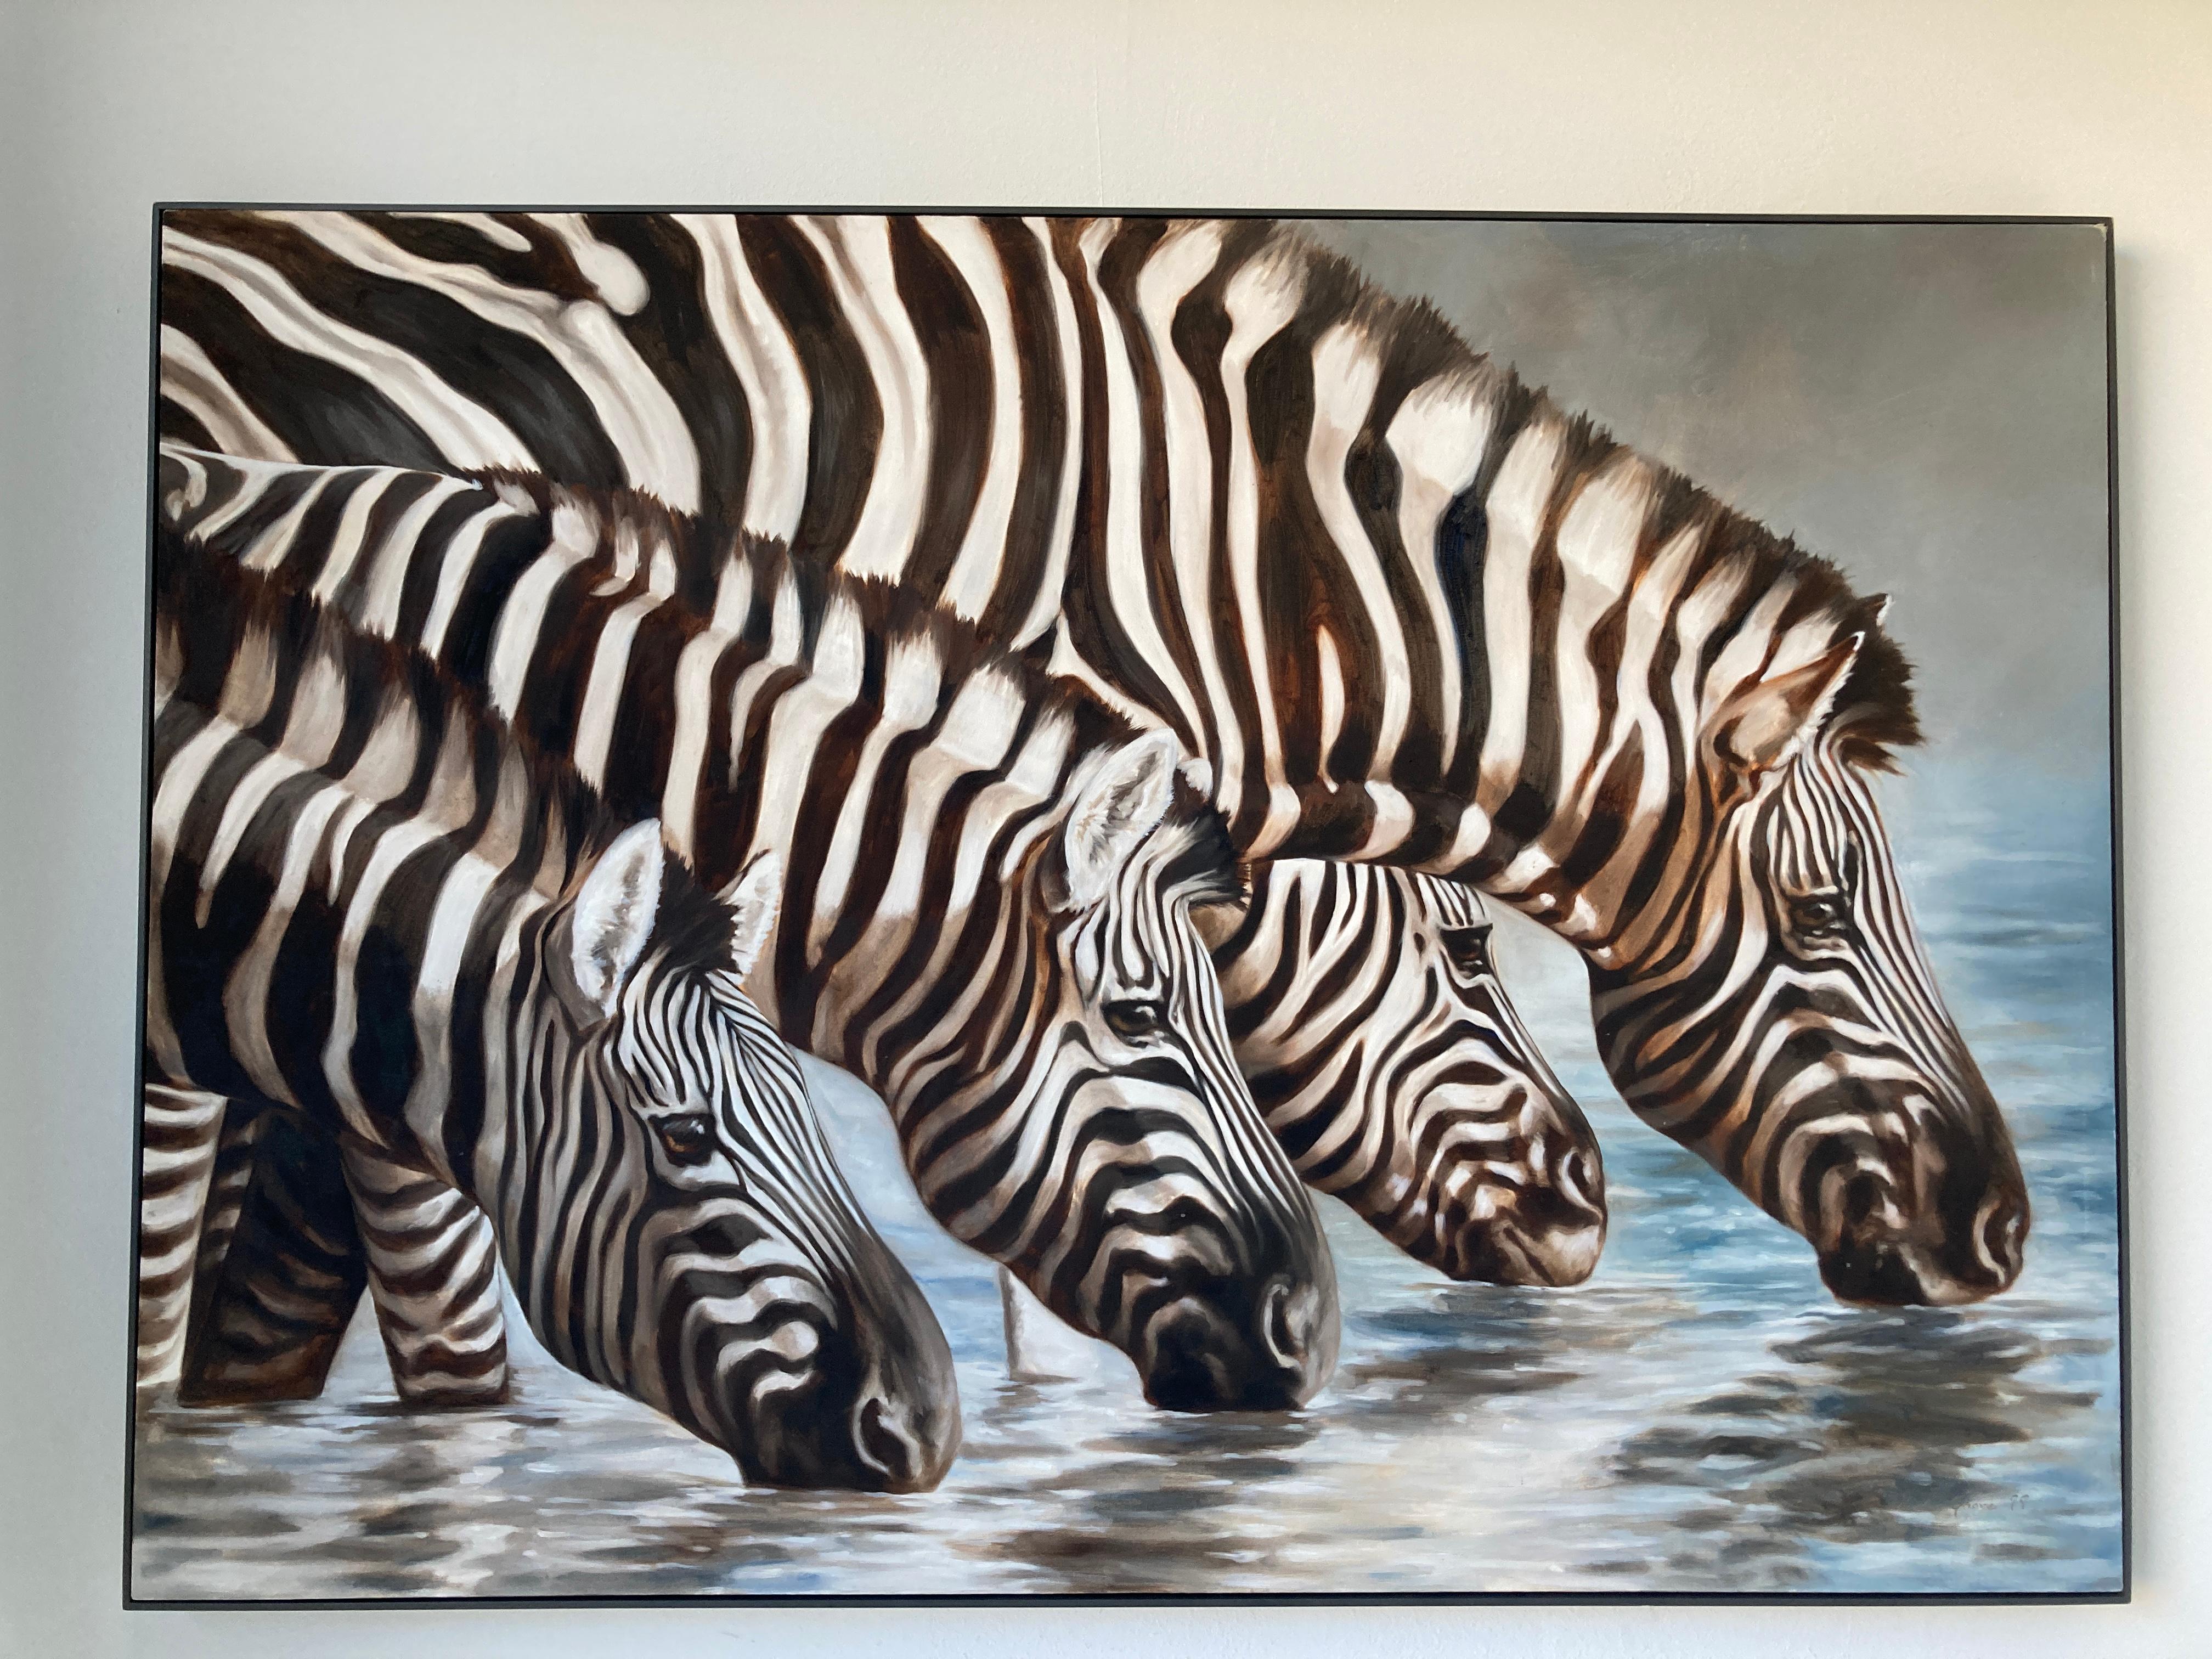 Very large oil on canvas, Oasis, African Zebras by Kindrie Grove, Canadian Artist.
Large oil painting that depicts a group of zebras drinking peacefully in a river in Africa.
Made in 1999.
Kindrie Grove Studios are in Canada, contemporary artist